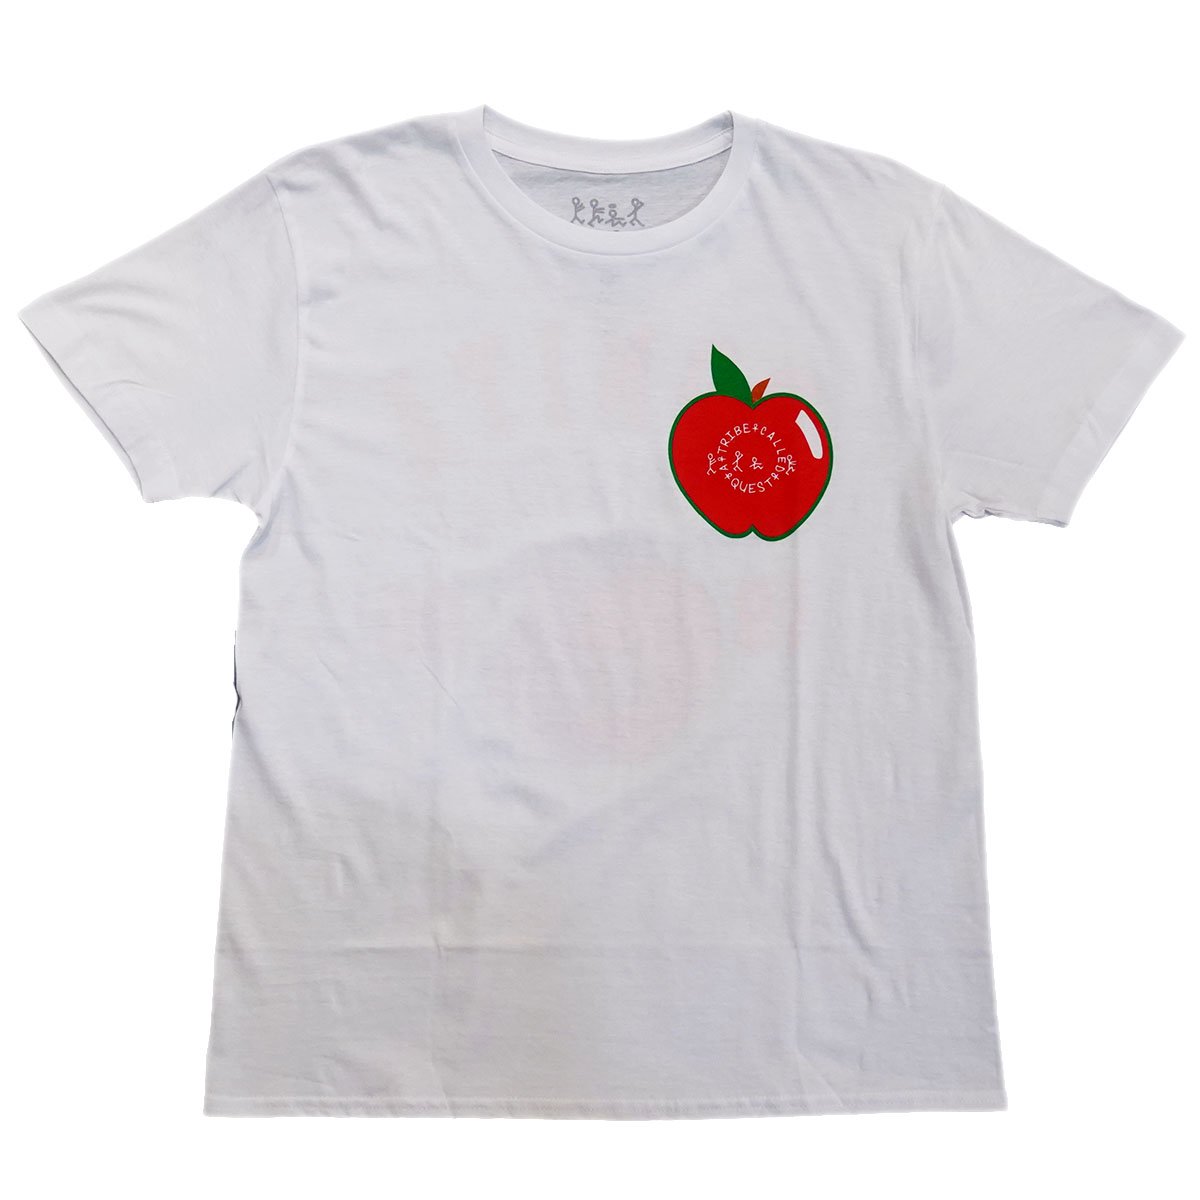 Fedup | HIPHOP WEAR | <img class='new_mark_img1' src='https://img.shop-pro.jp/img/new/icons6.gif' style='border:none;display:inline;margin:0px;padding:0px;width:auto;' />A Tribe Called Quest 